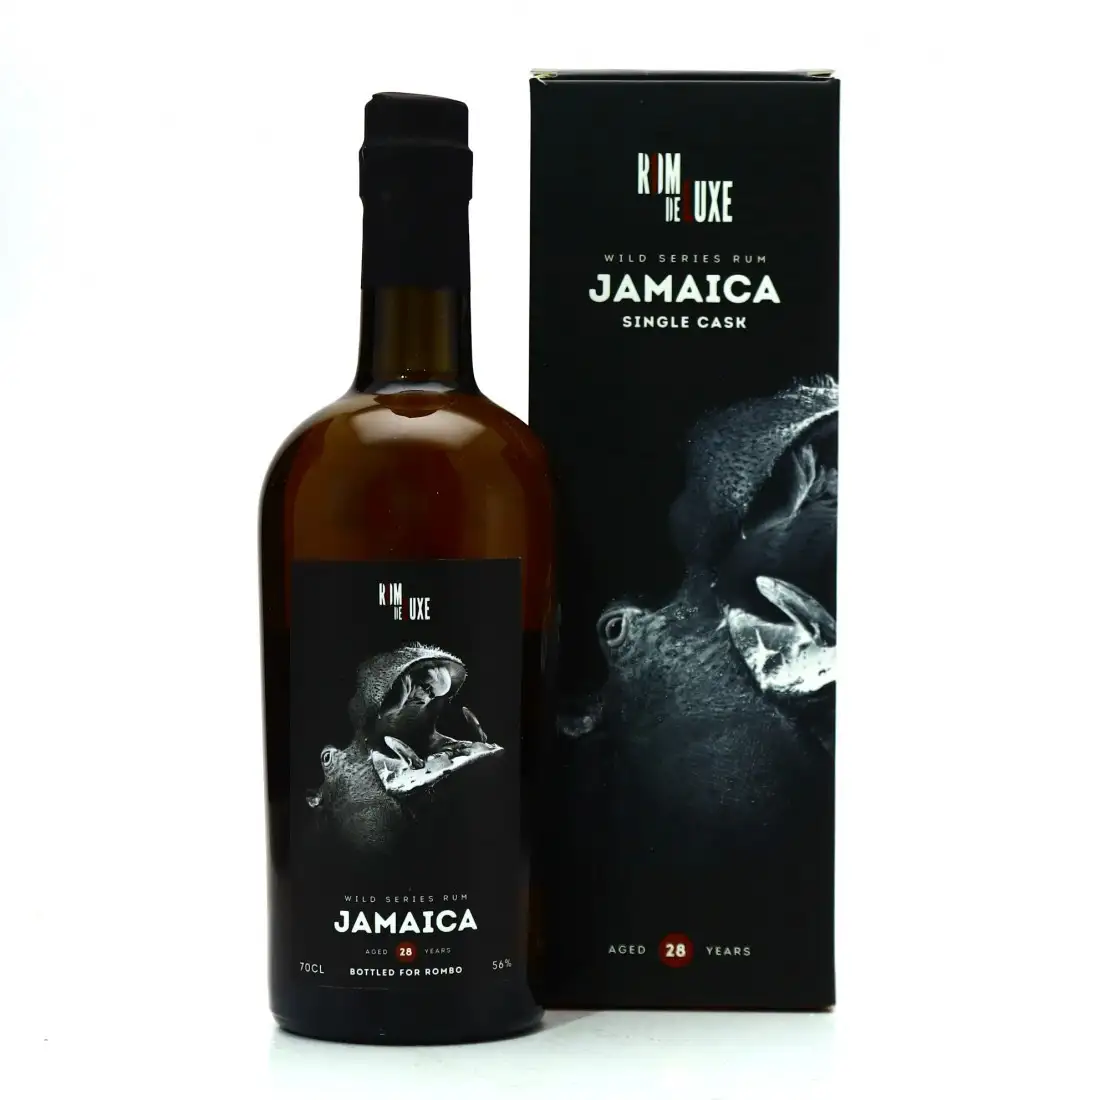 Image of the front of the bottle of the rum Wild Series Rum Jamaica No. 18 (Rombo.dk) JMC